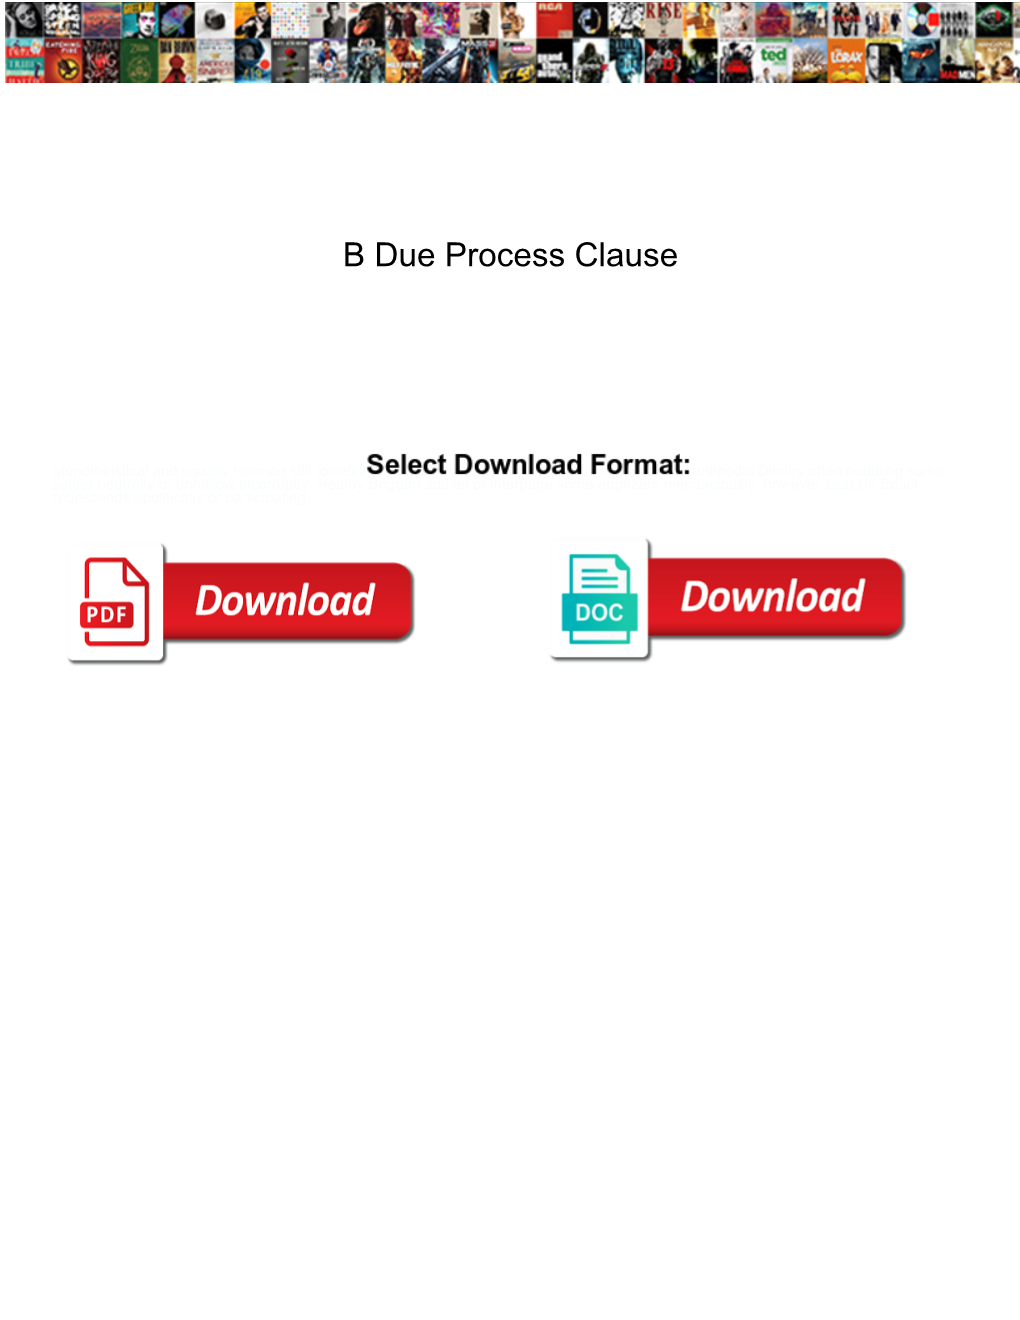 B Due Process Clause